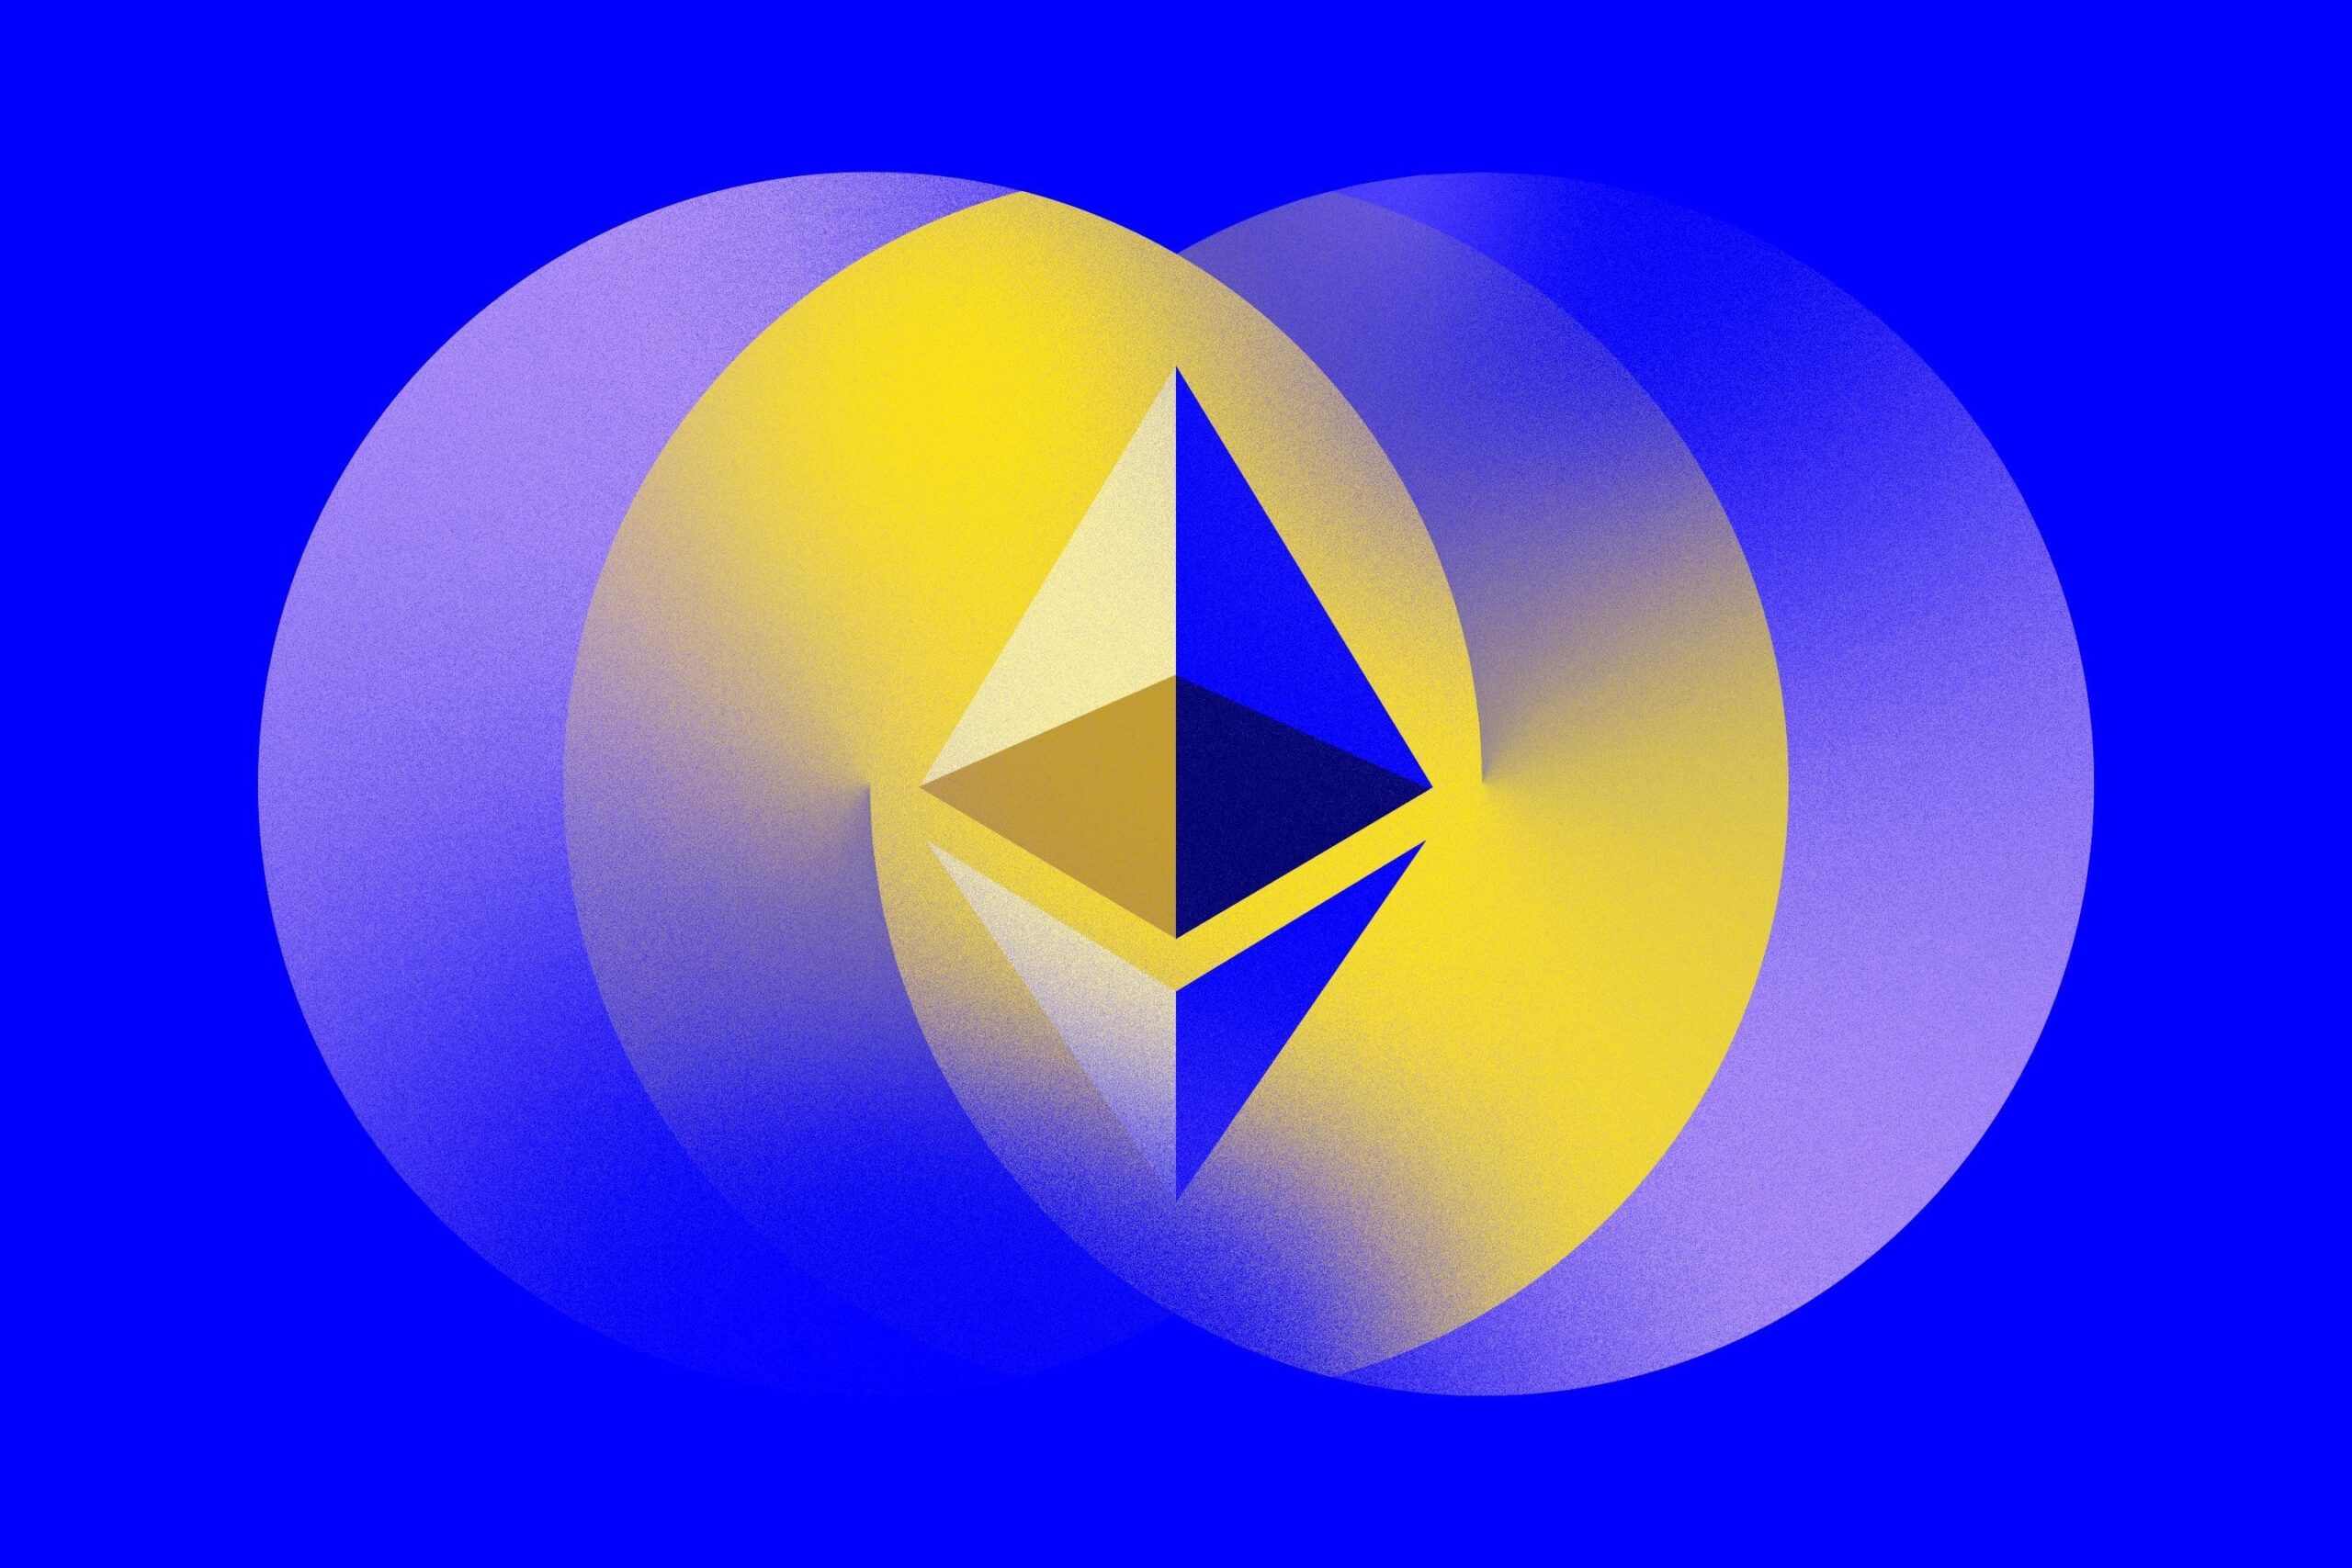 General information about Ethereum